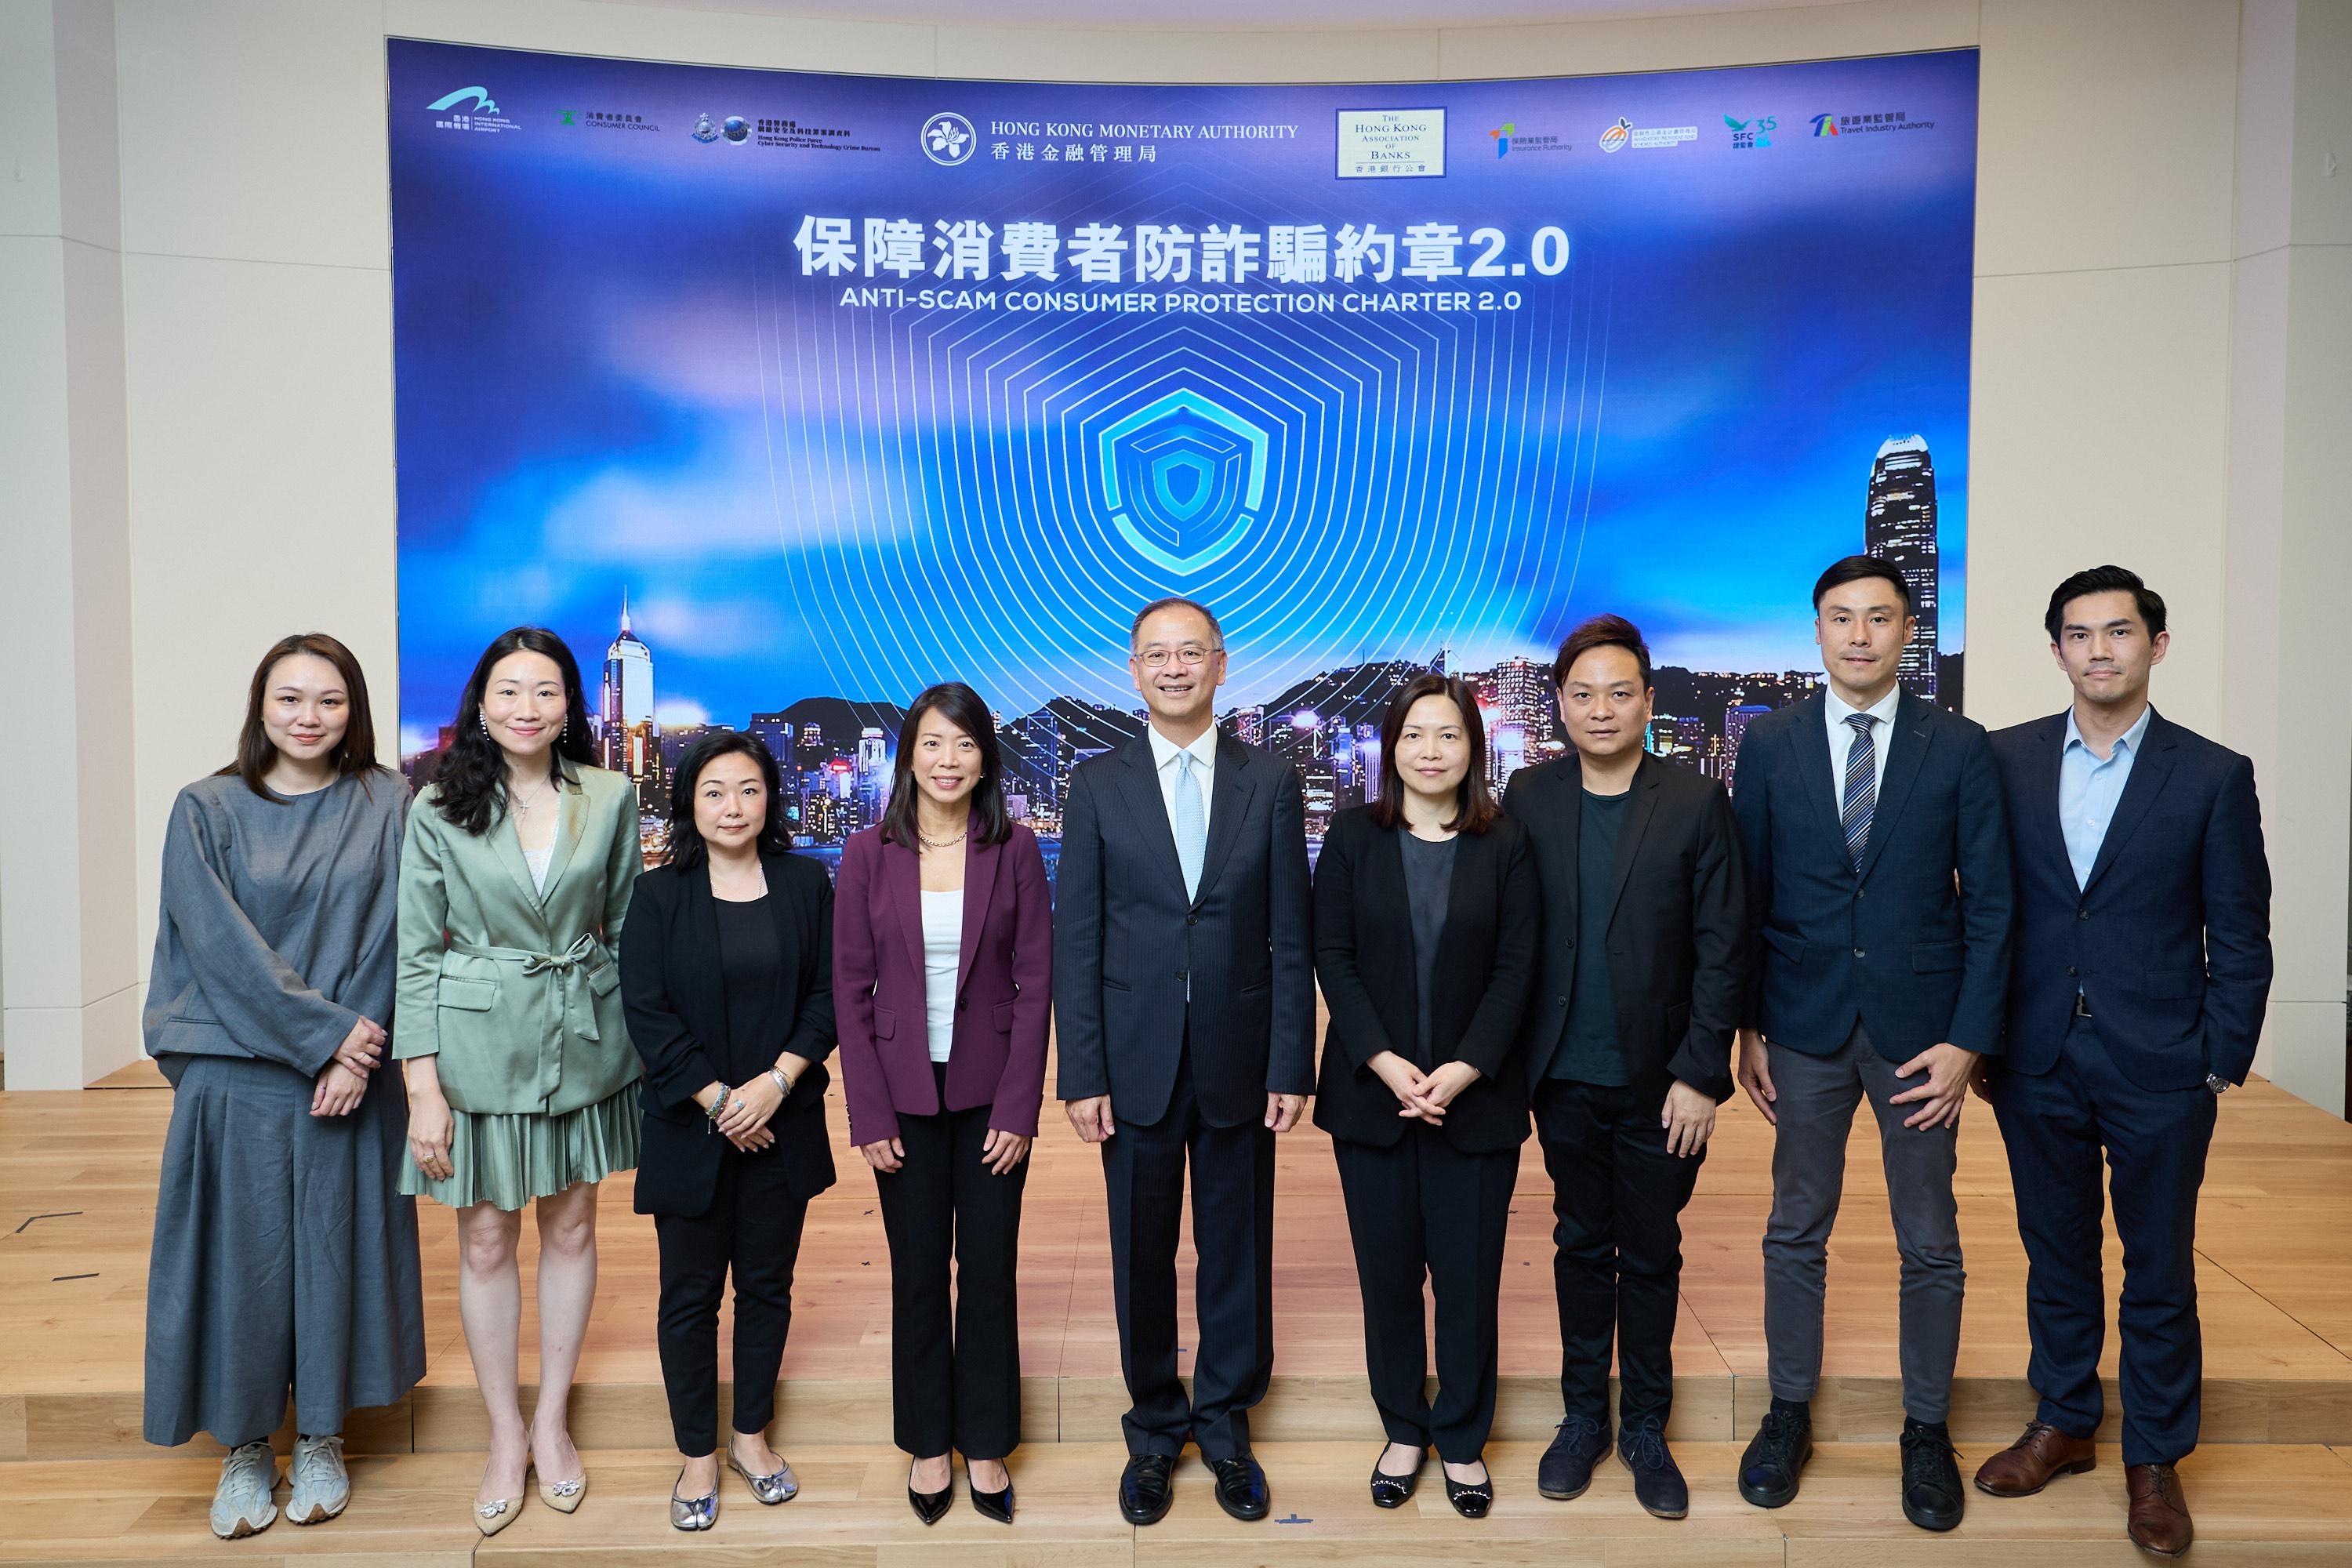 The Chief Executive of the Hong Kong Monetary Authority, Mr Eddie Yue (fifth left); the Chairman of the Hong Kong Association of Banks and the Chief Executive Officer, Hong Kong, HSBC, Ms Luanne Lim (fourth left); and representatives of merchant institutions attended the event to support the Anti-Scam Consumer Protection Charter 2.0.